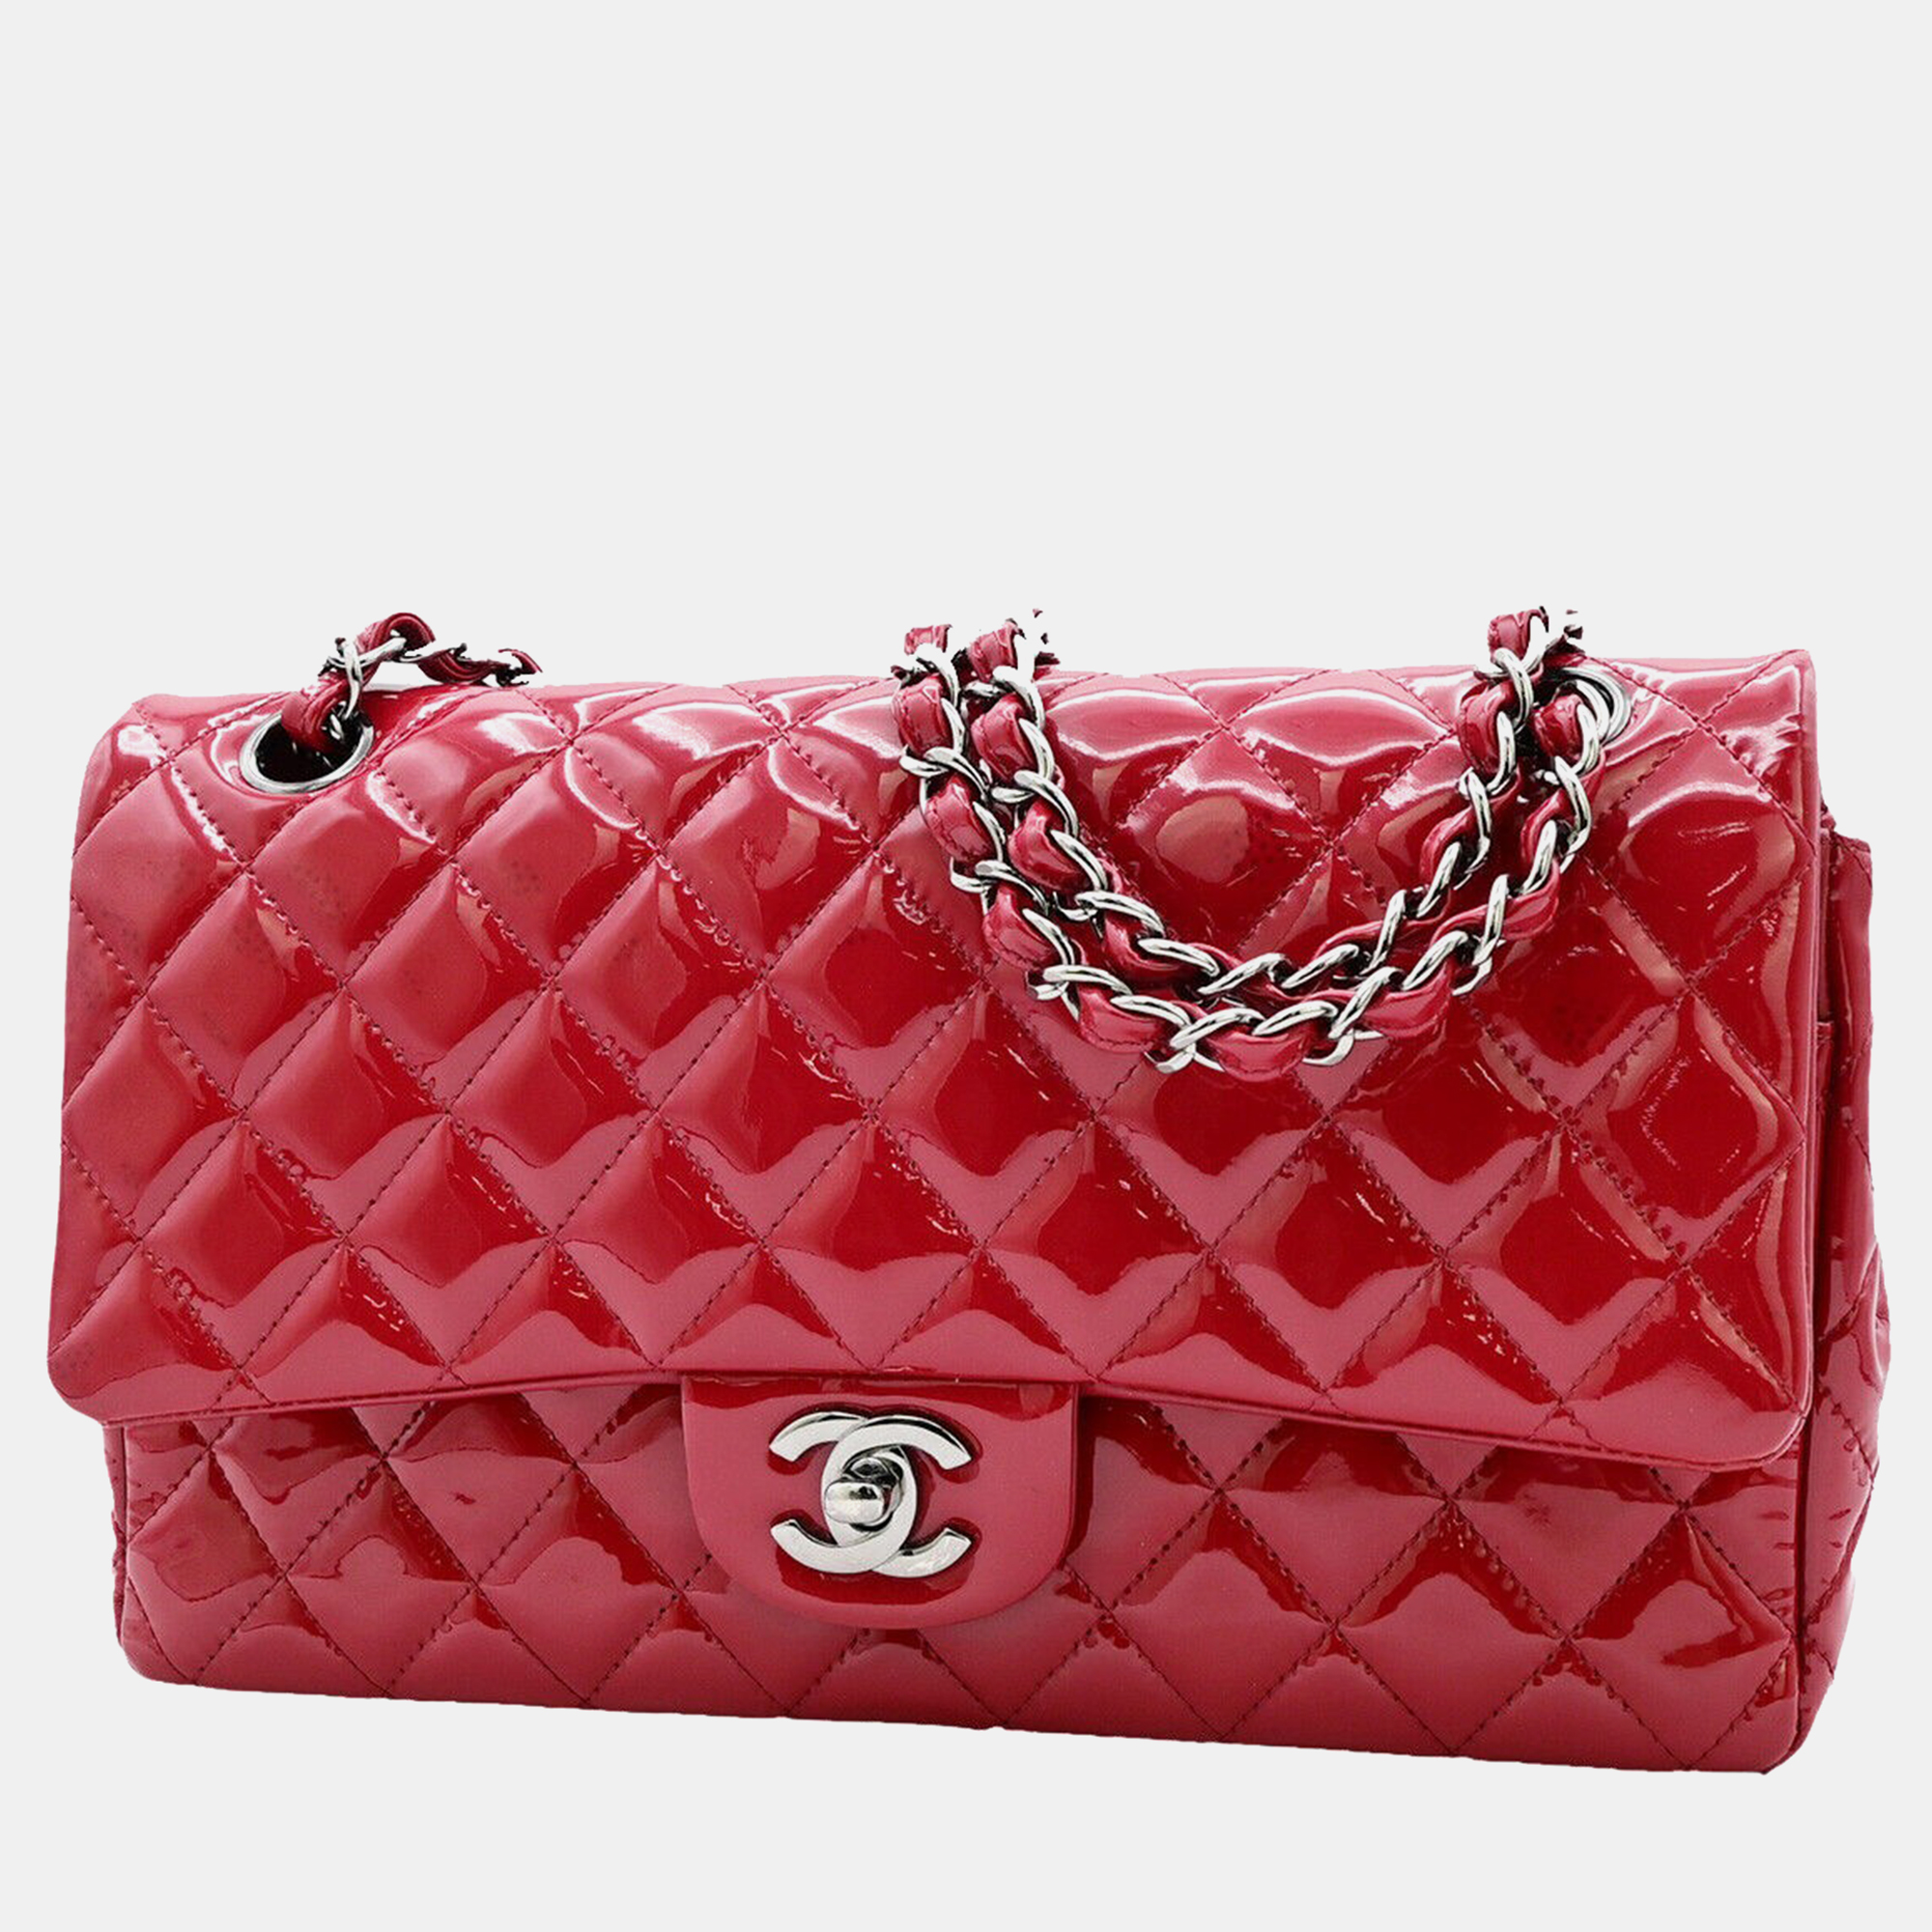 Chanel red patent leather medium classic double flap shoulder bags